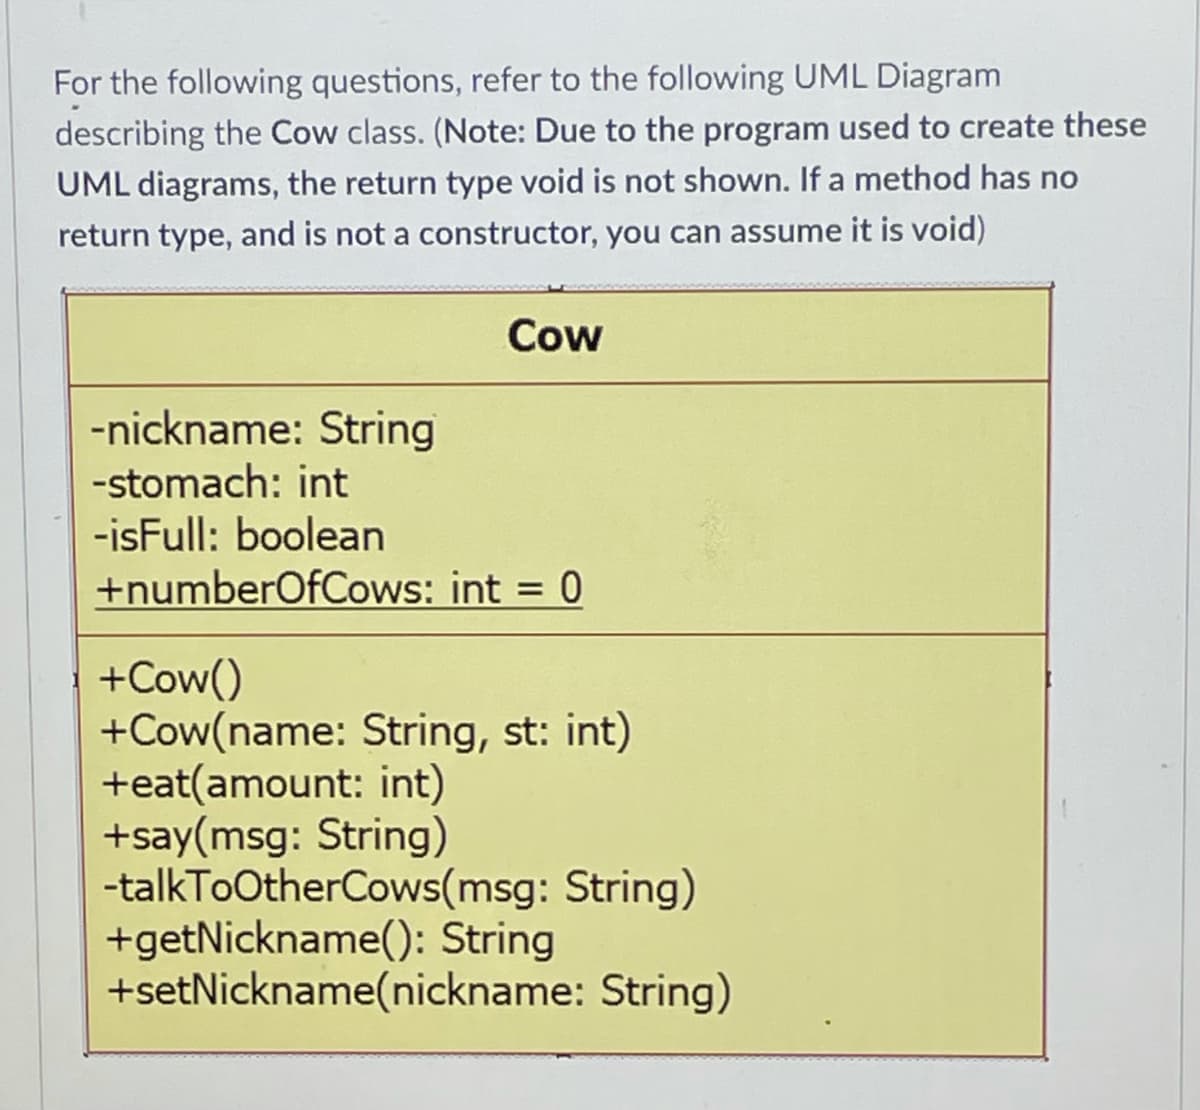 For the following questions, refer to the following UML Diagram
describing the Cow class. (Note: Due to the program used to create these
UML diagrams, the return type void is not shown. If a method has no
return type, and is not a constructor, you can assume it is void)
Cow
-nickname: String
-stomach: int
-isFull: boolean
+numberOfCows: int = 0
%3D
+Cow()
+Cow(name: String, st: int)
+eat(amount: int)
+say(msg: String)
-talkToOtherCows(msg: String)
+getNickname(): String
+setNickname(nickname: String)
